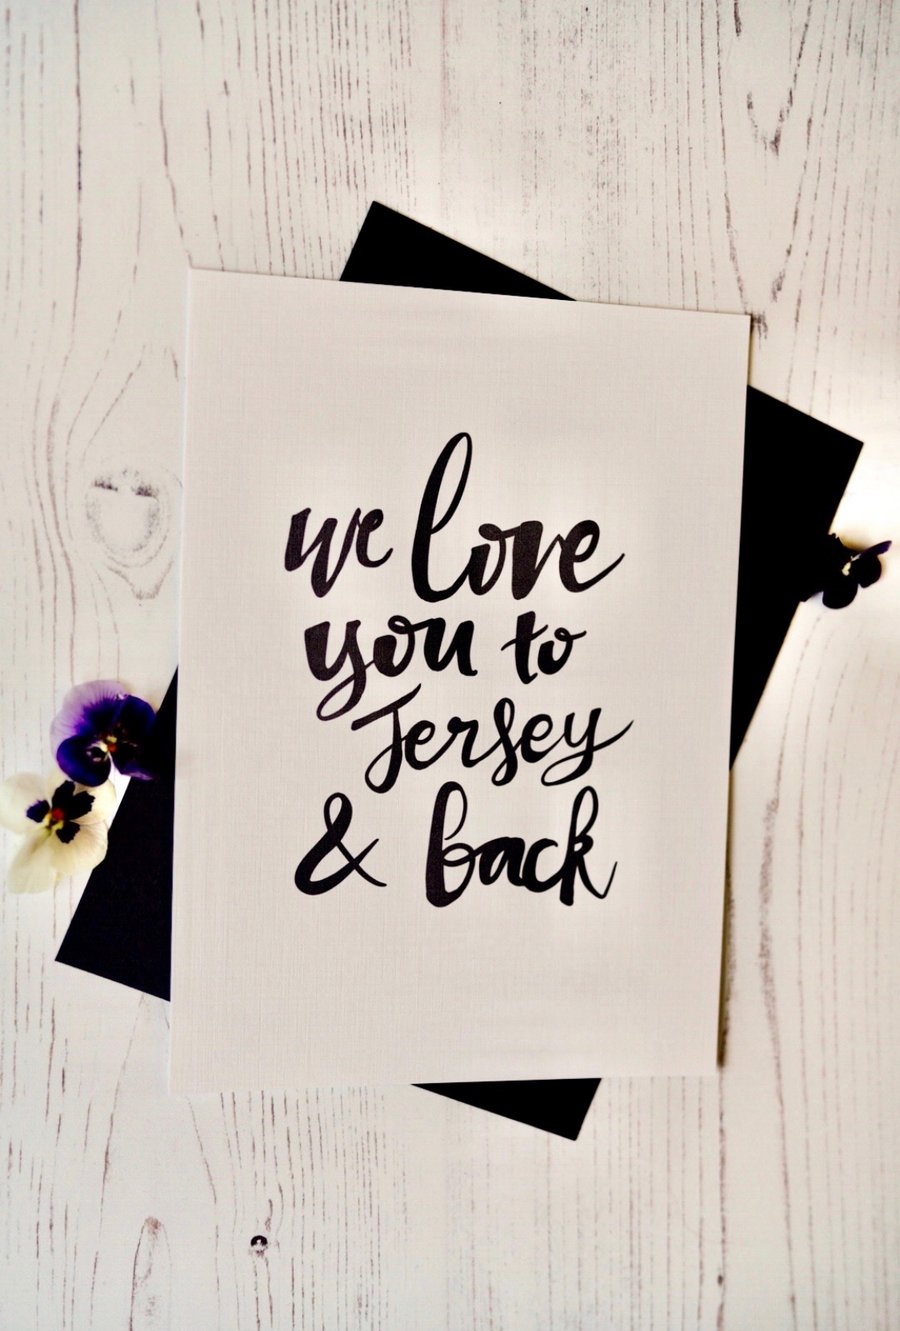 We love you to Jersey print 